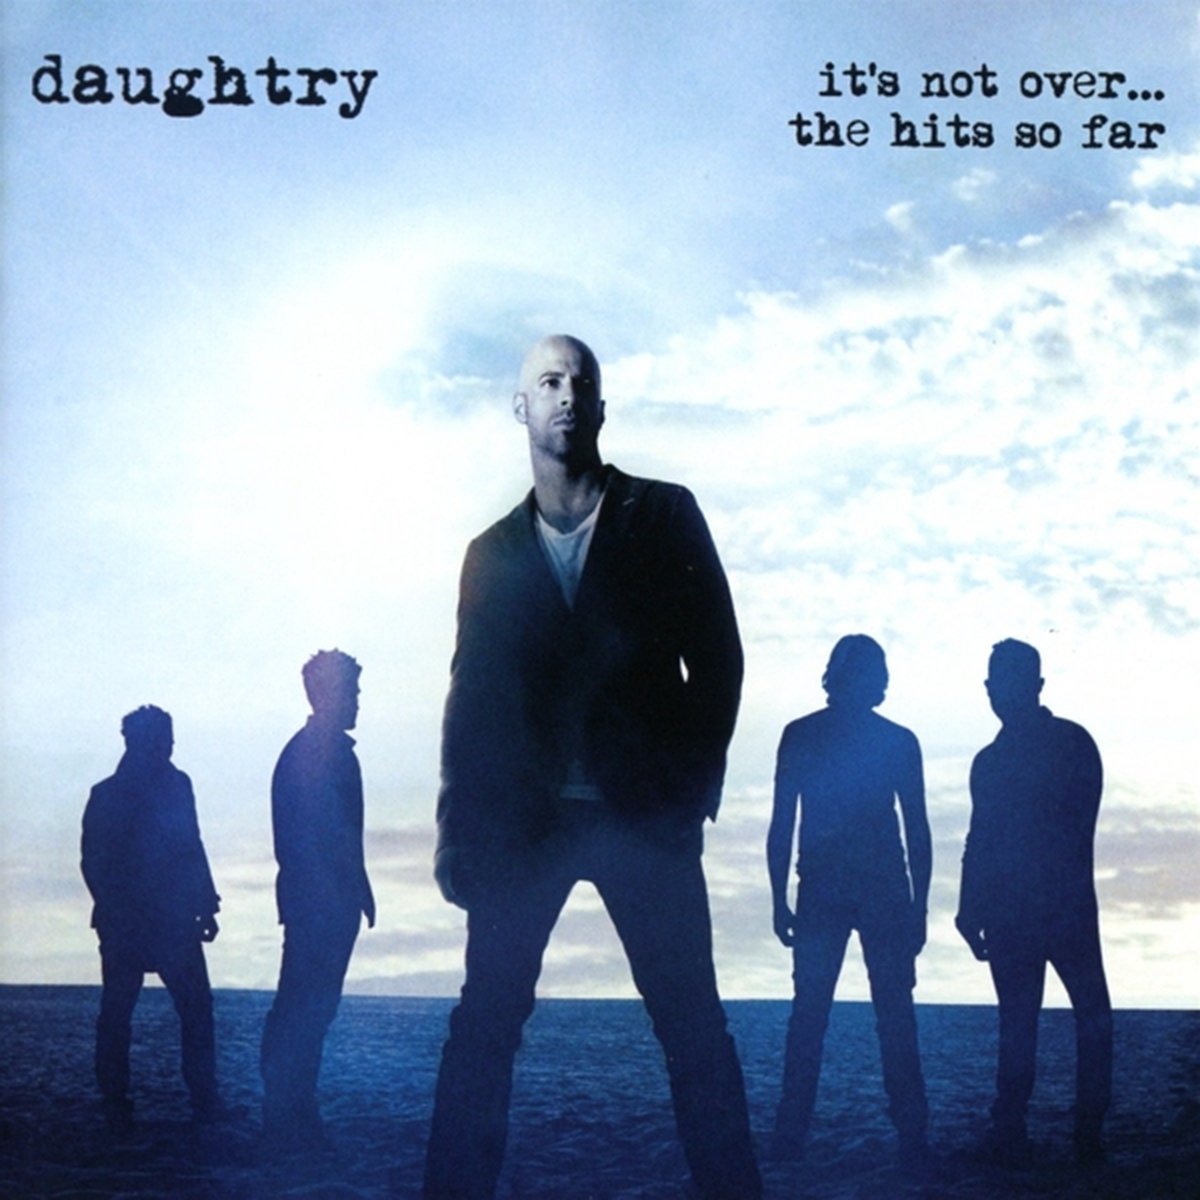 IT'S NOT OVER....THE HITS SO FAR - Daughtry